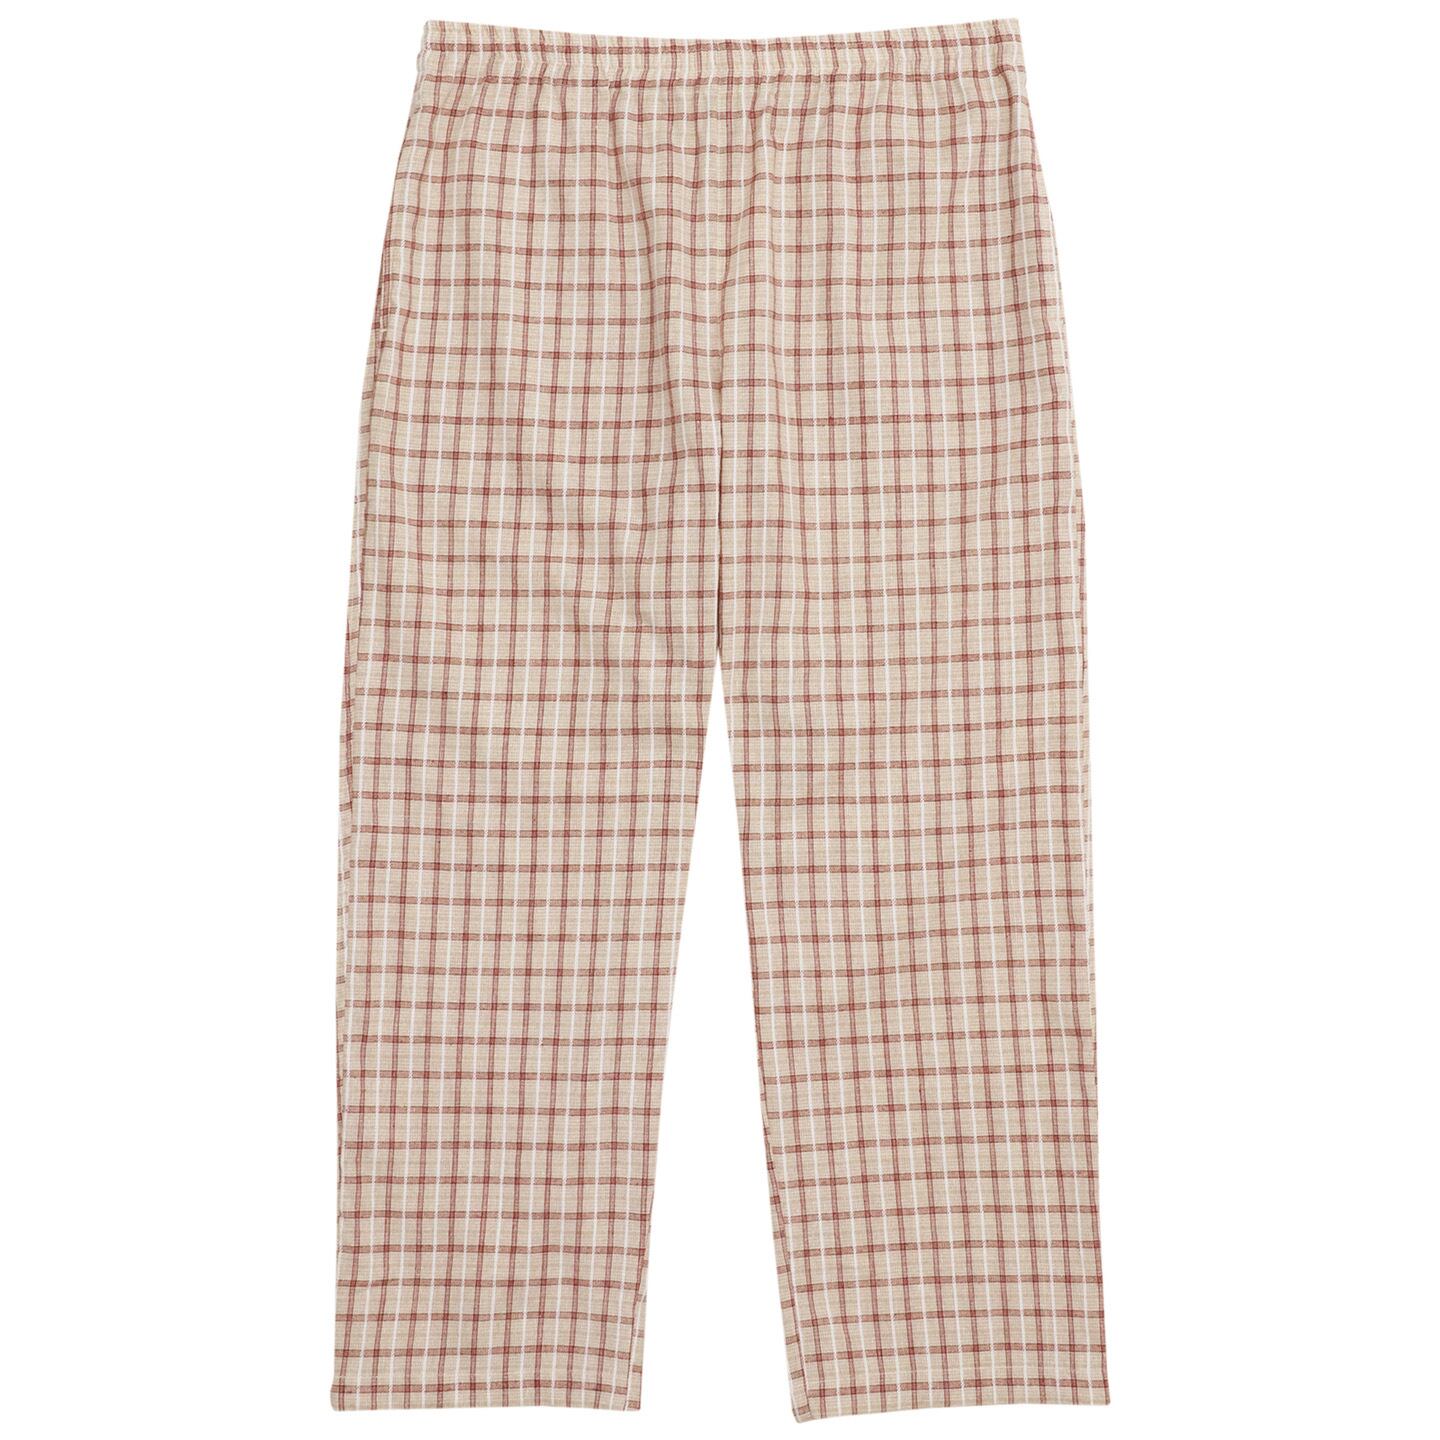 WHIMSY / BEACH PANT 2 / BEIGE /M | LATITUDE powered by BASE